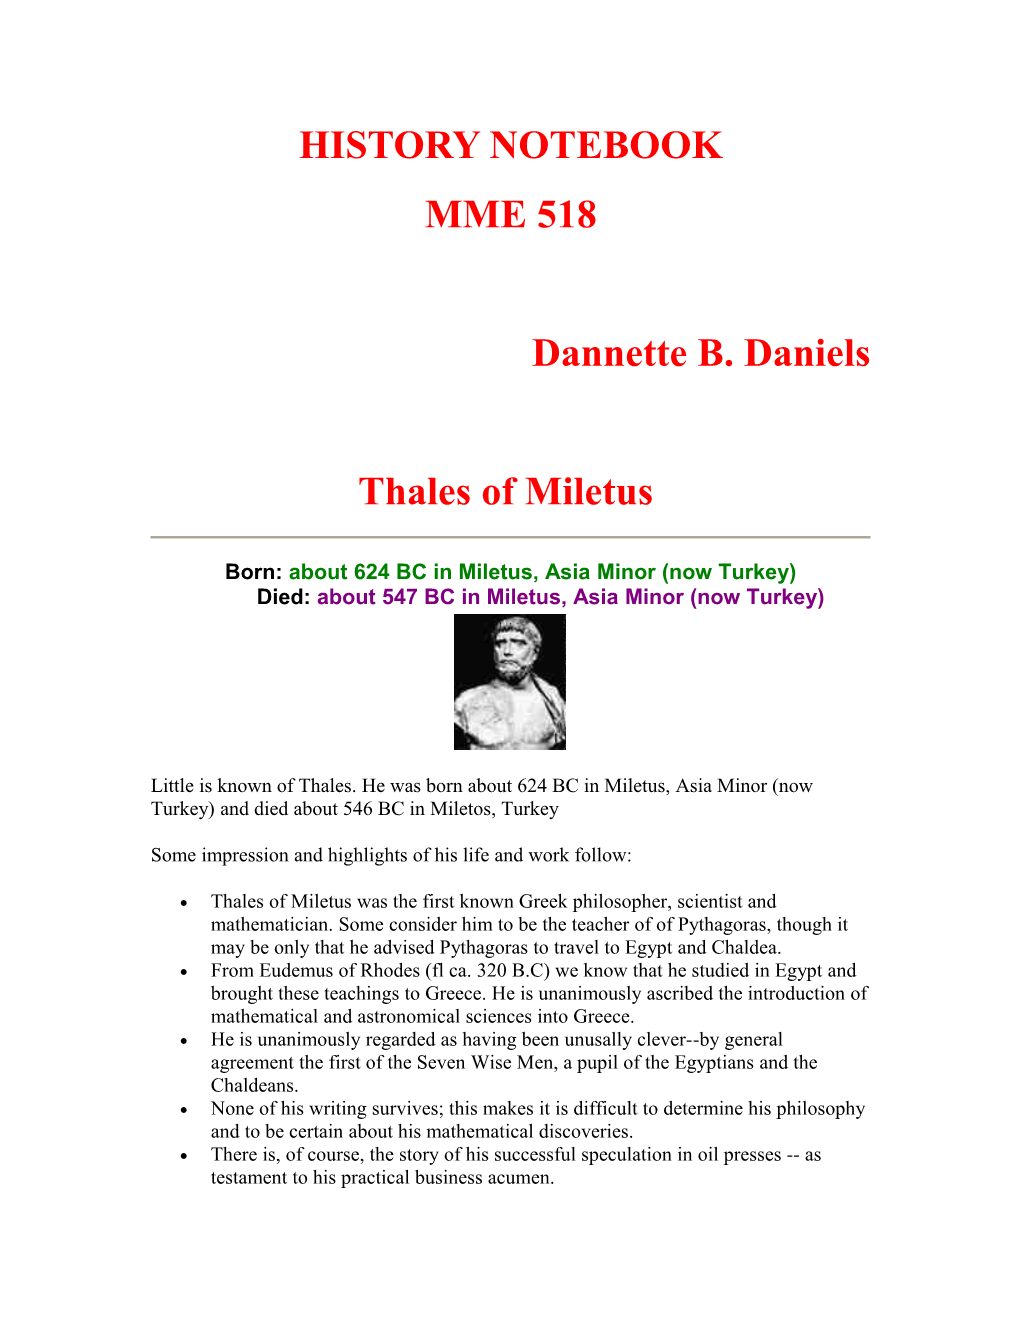 Quotations by Thales of Miletus